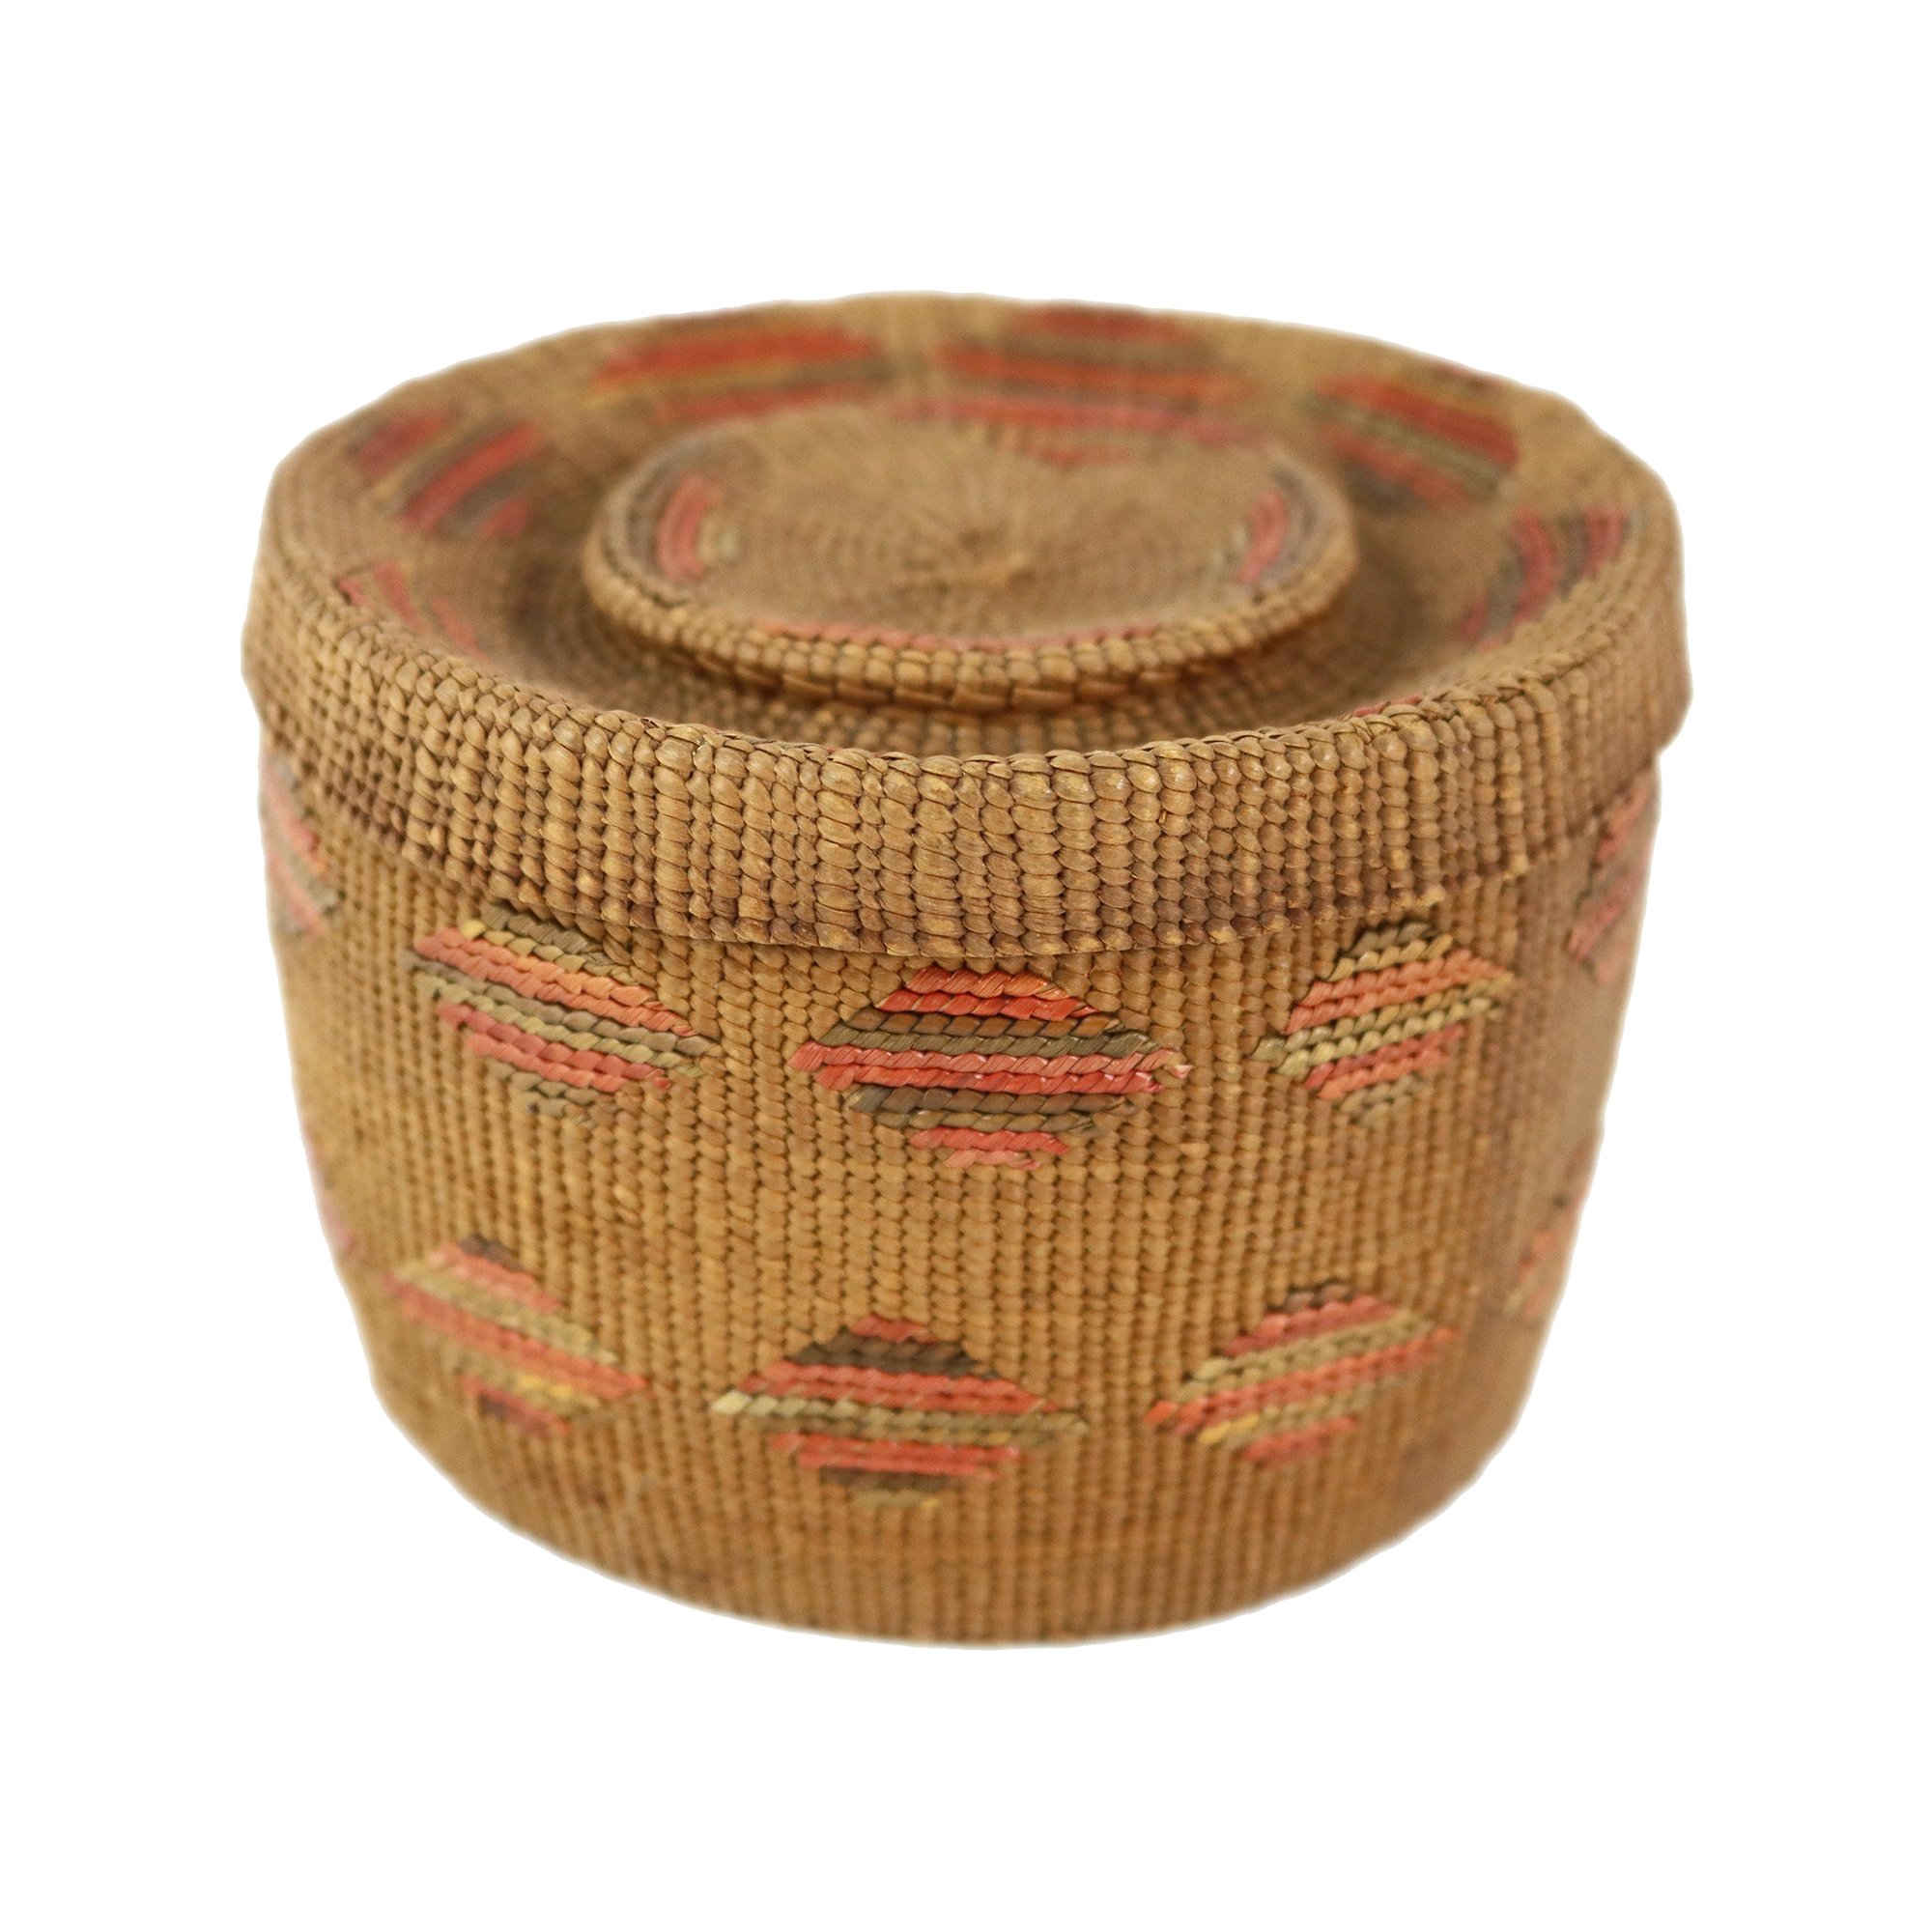 Tlingit Spruce Root Circular Rattle Top Basket, early 20th century